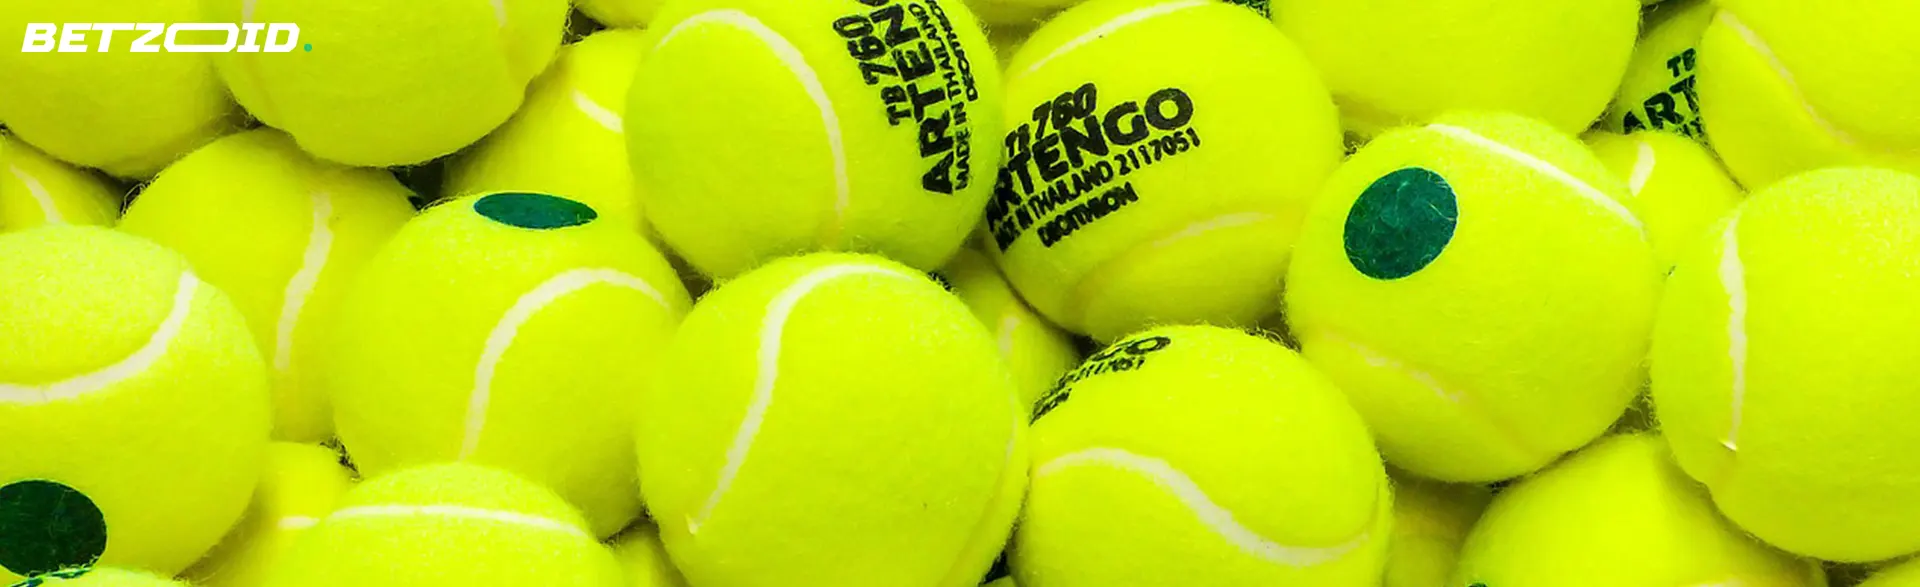 A large number of bright yellow tennis balls.